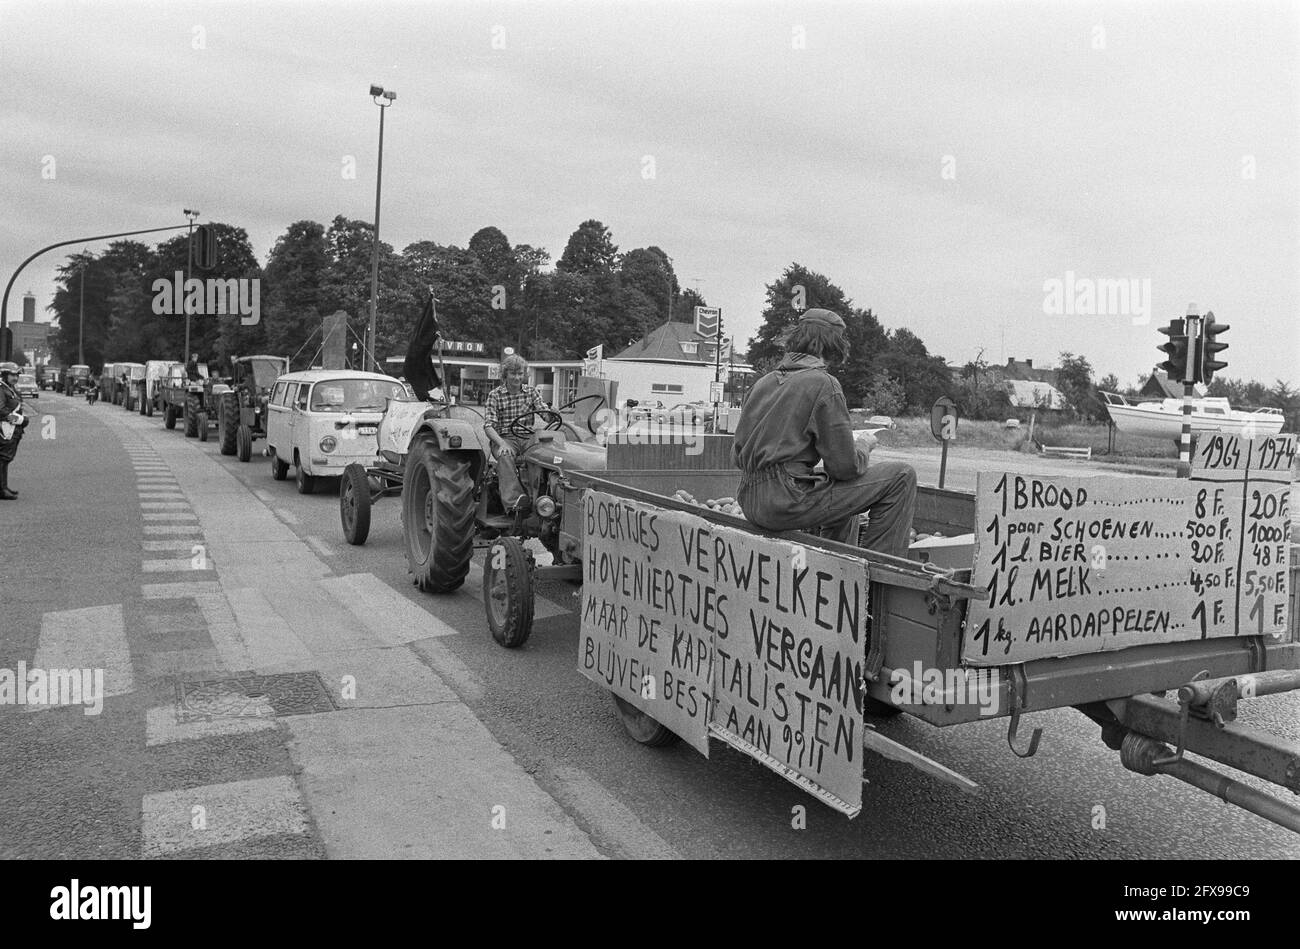 Farmers demonstrate in Belgium; farmers with slogans on car during  demonstration, farmer boys hand out potatoes to policeman, 2 September  1974, AARDAPPEL, FARMERS, demonstrations, The Netherlands, 20th century  press agency photo, news